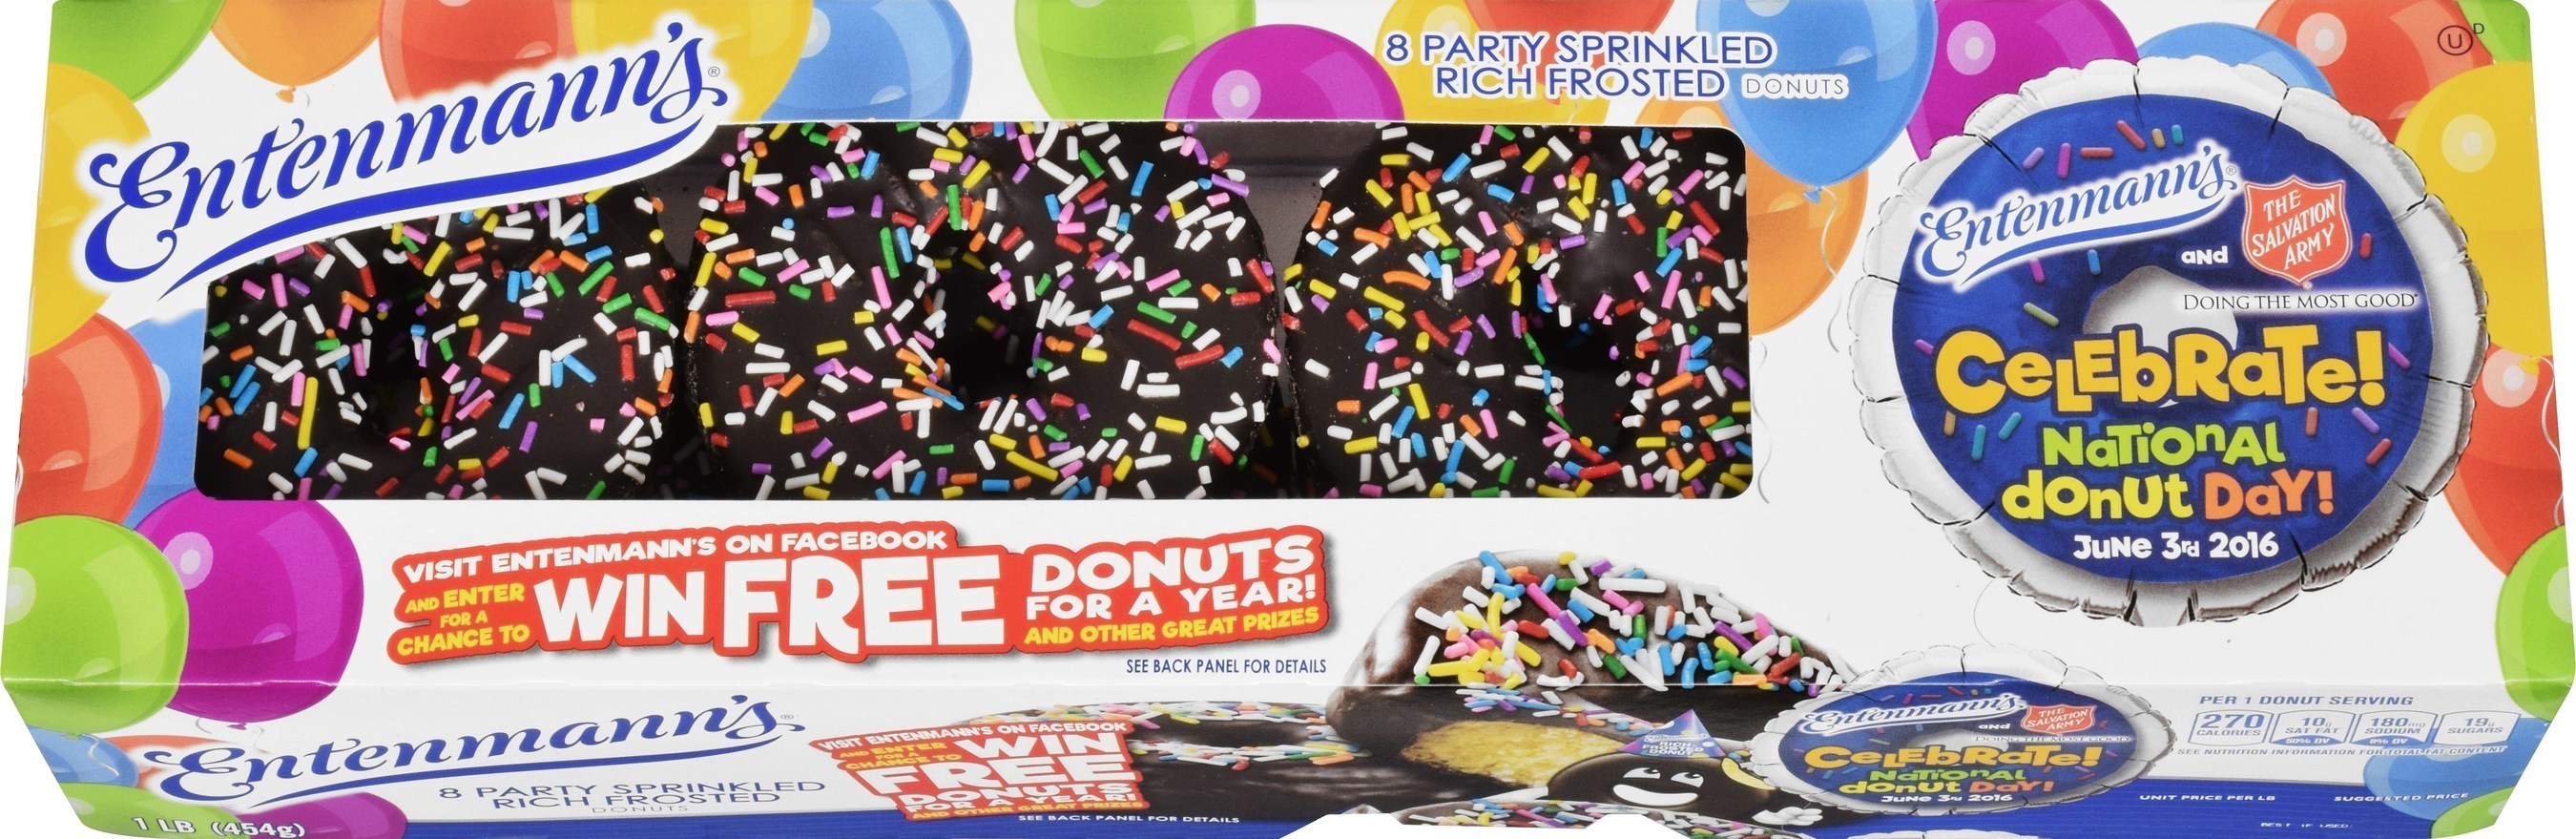 Entenmann's(R) And The Salvation Army Are Having A Big Party To Celebrate 2016 "National Donut Day" June 3rd With New Rich Frosted Party Sprinkled Donuts